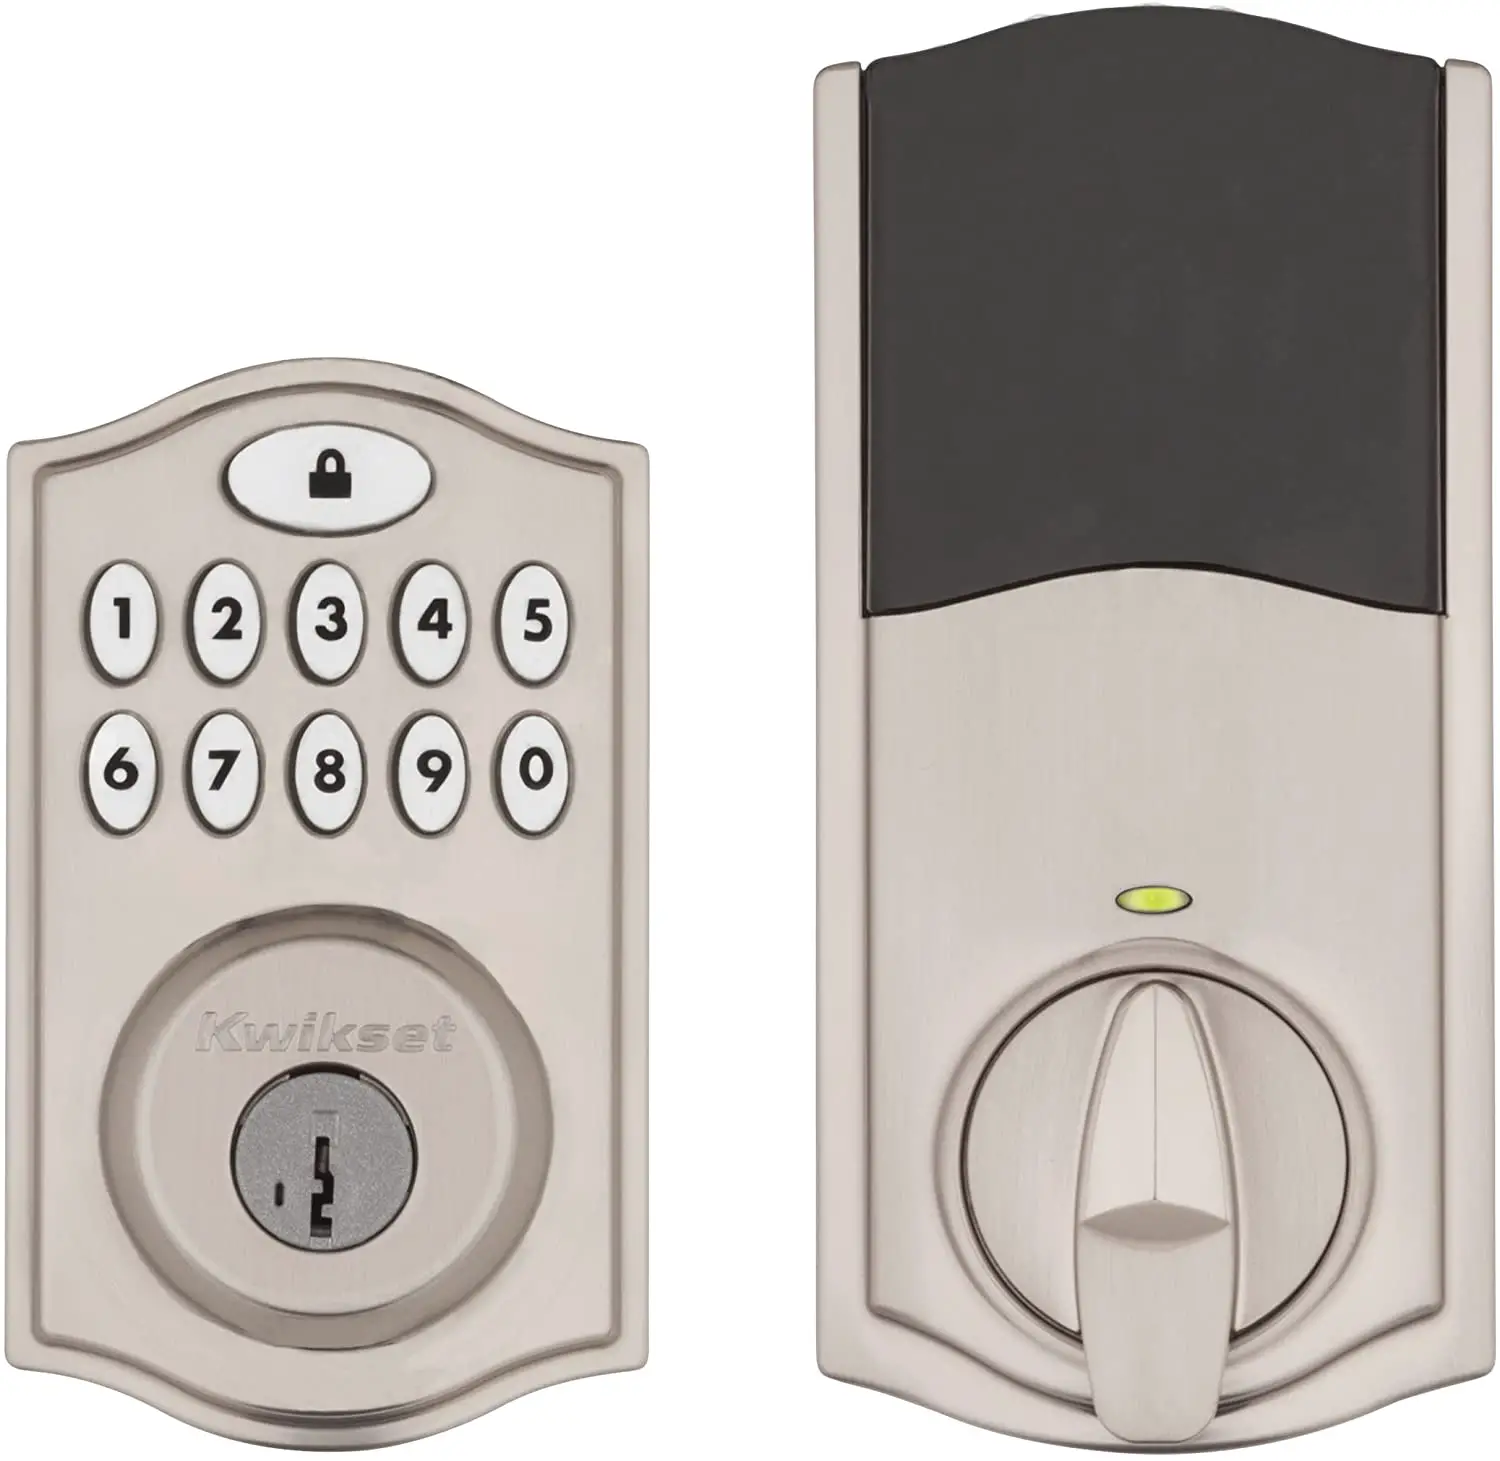 Smart Locks that Work with ADT1